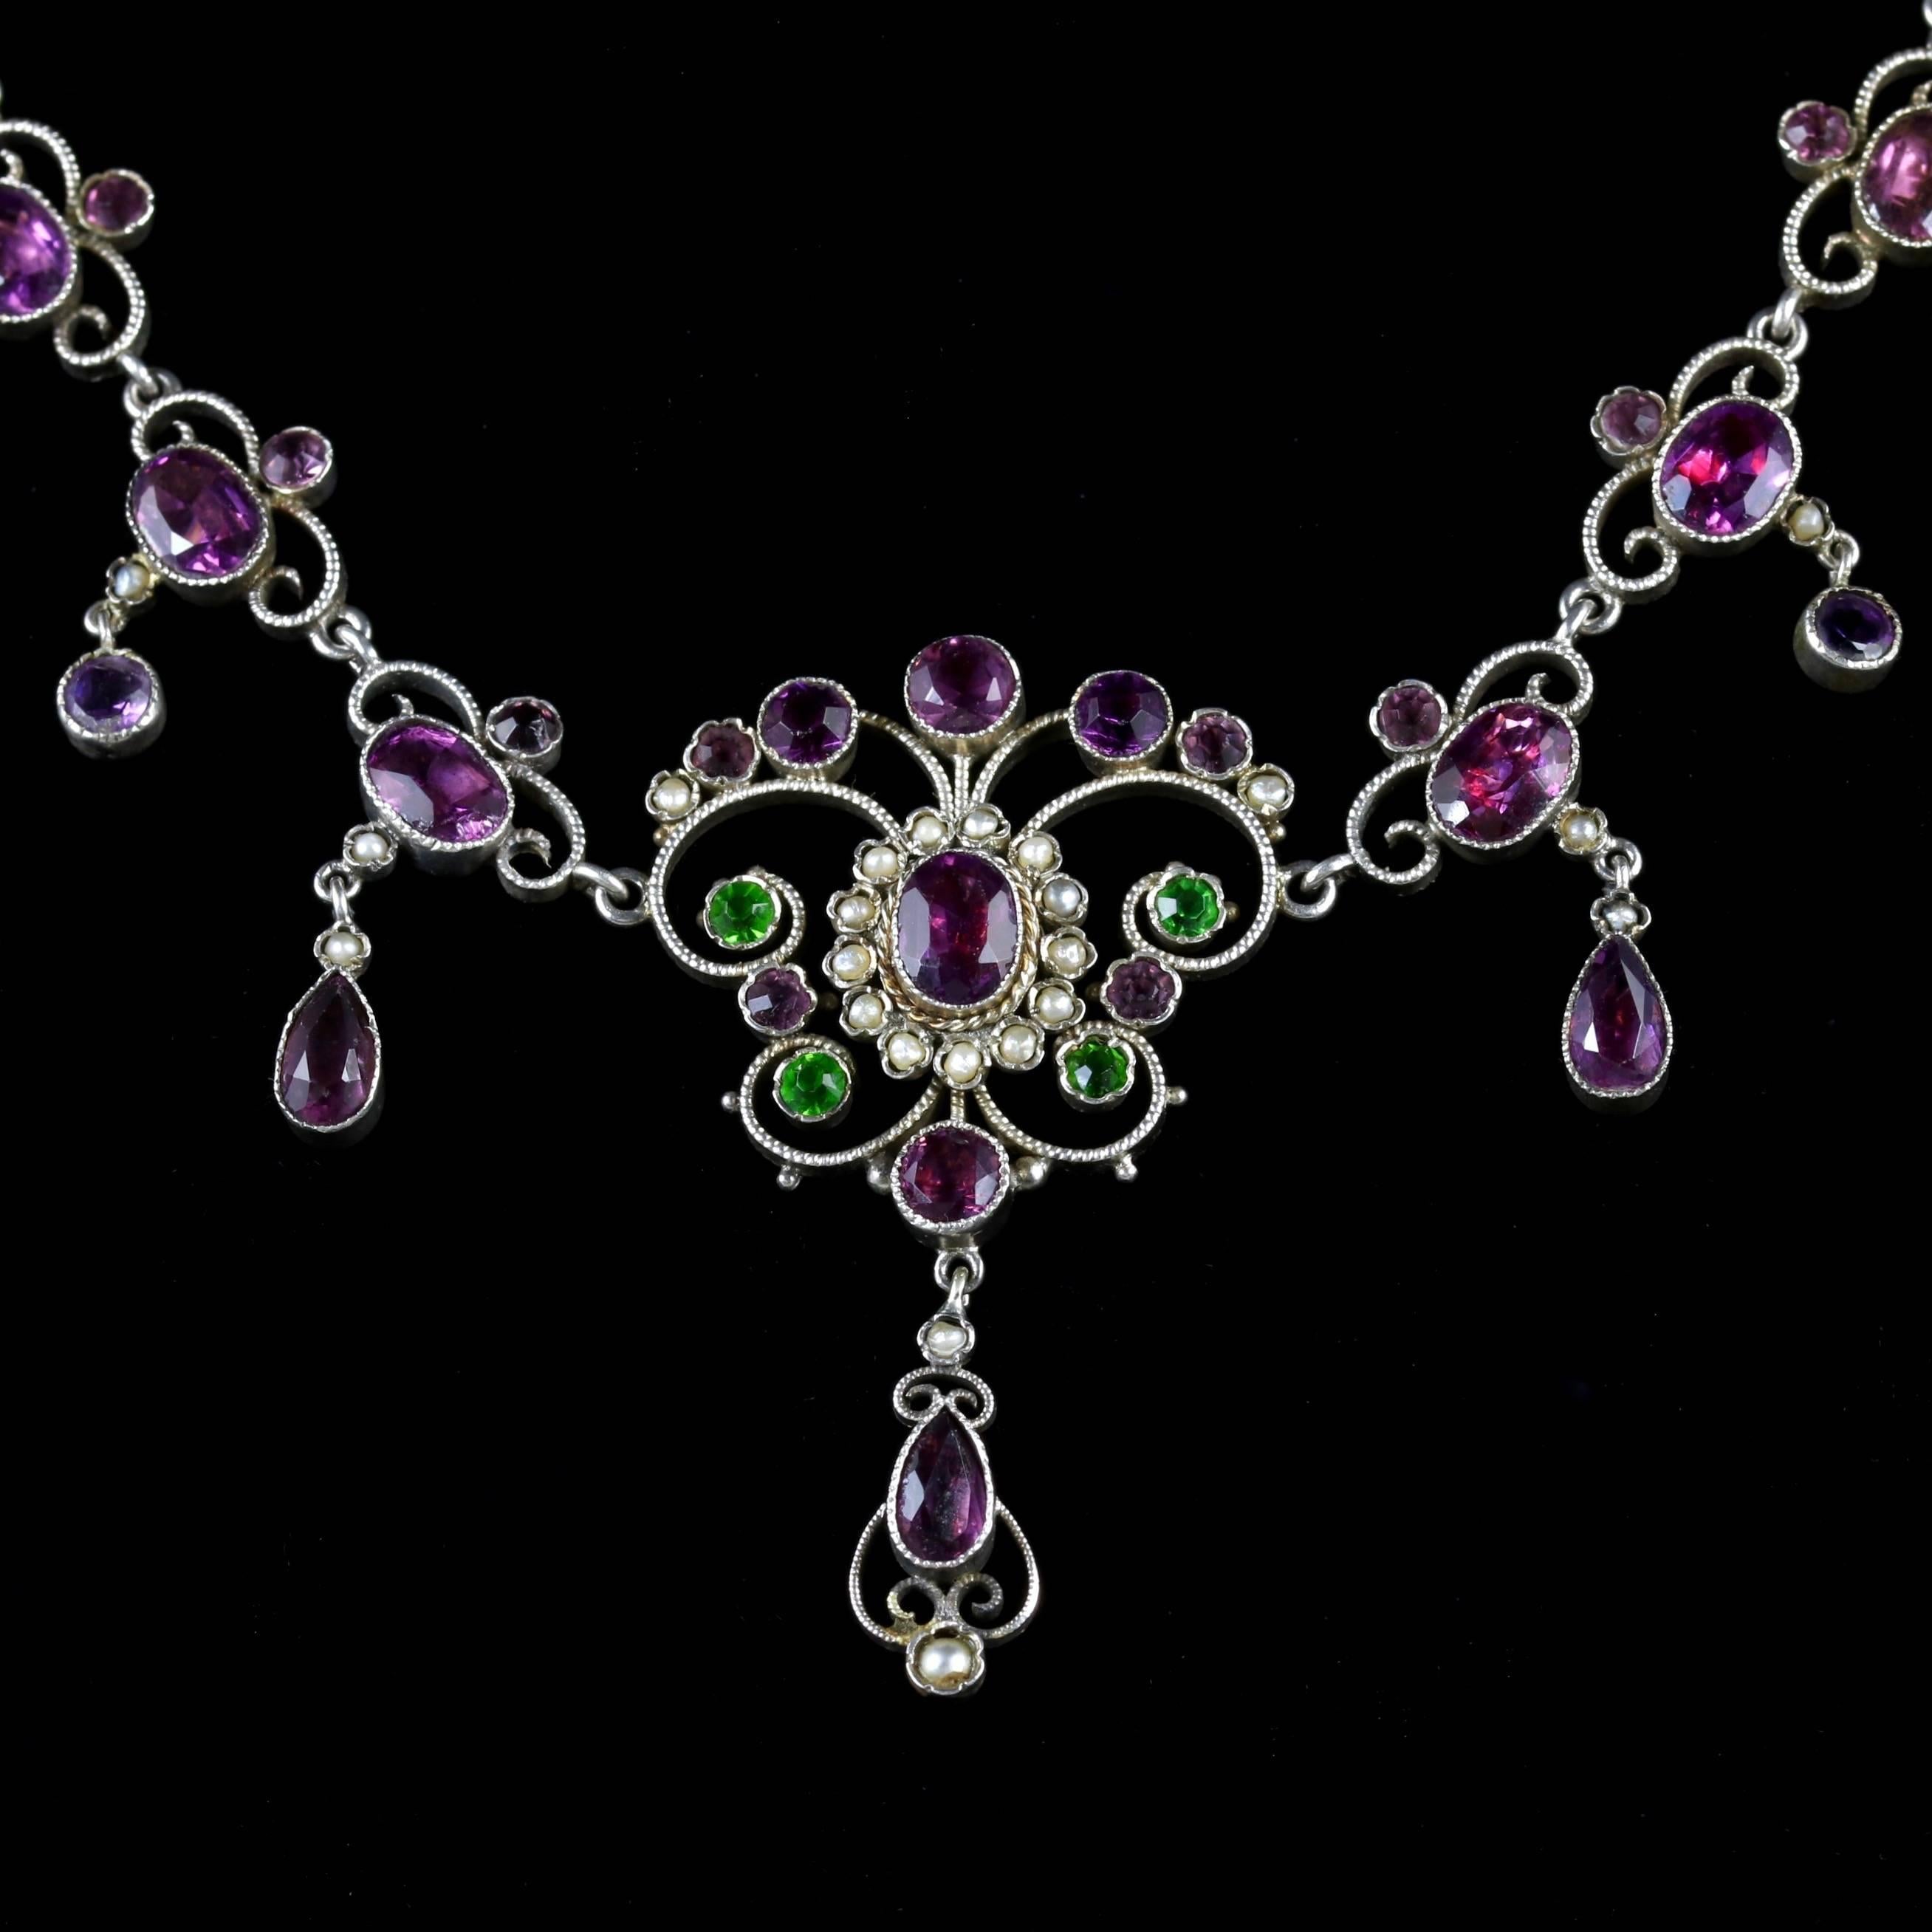 This Antique Victorian Silver Suffragette Paste Stone and Pearl necklace is beautiful, Circa 1900.

The necklace is complimented by a mixture of purple and green Paste Stones, with lustrous Pearl nested in-between, which is all original to the